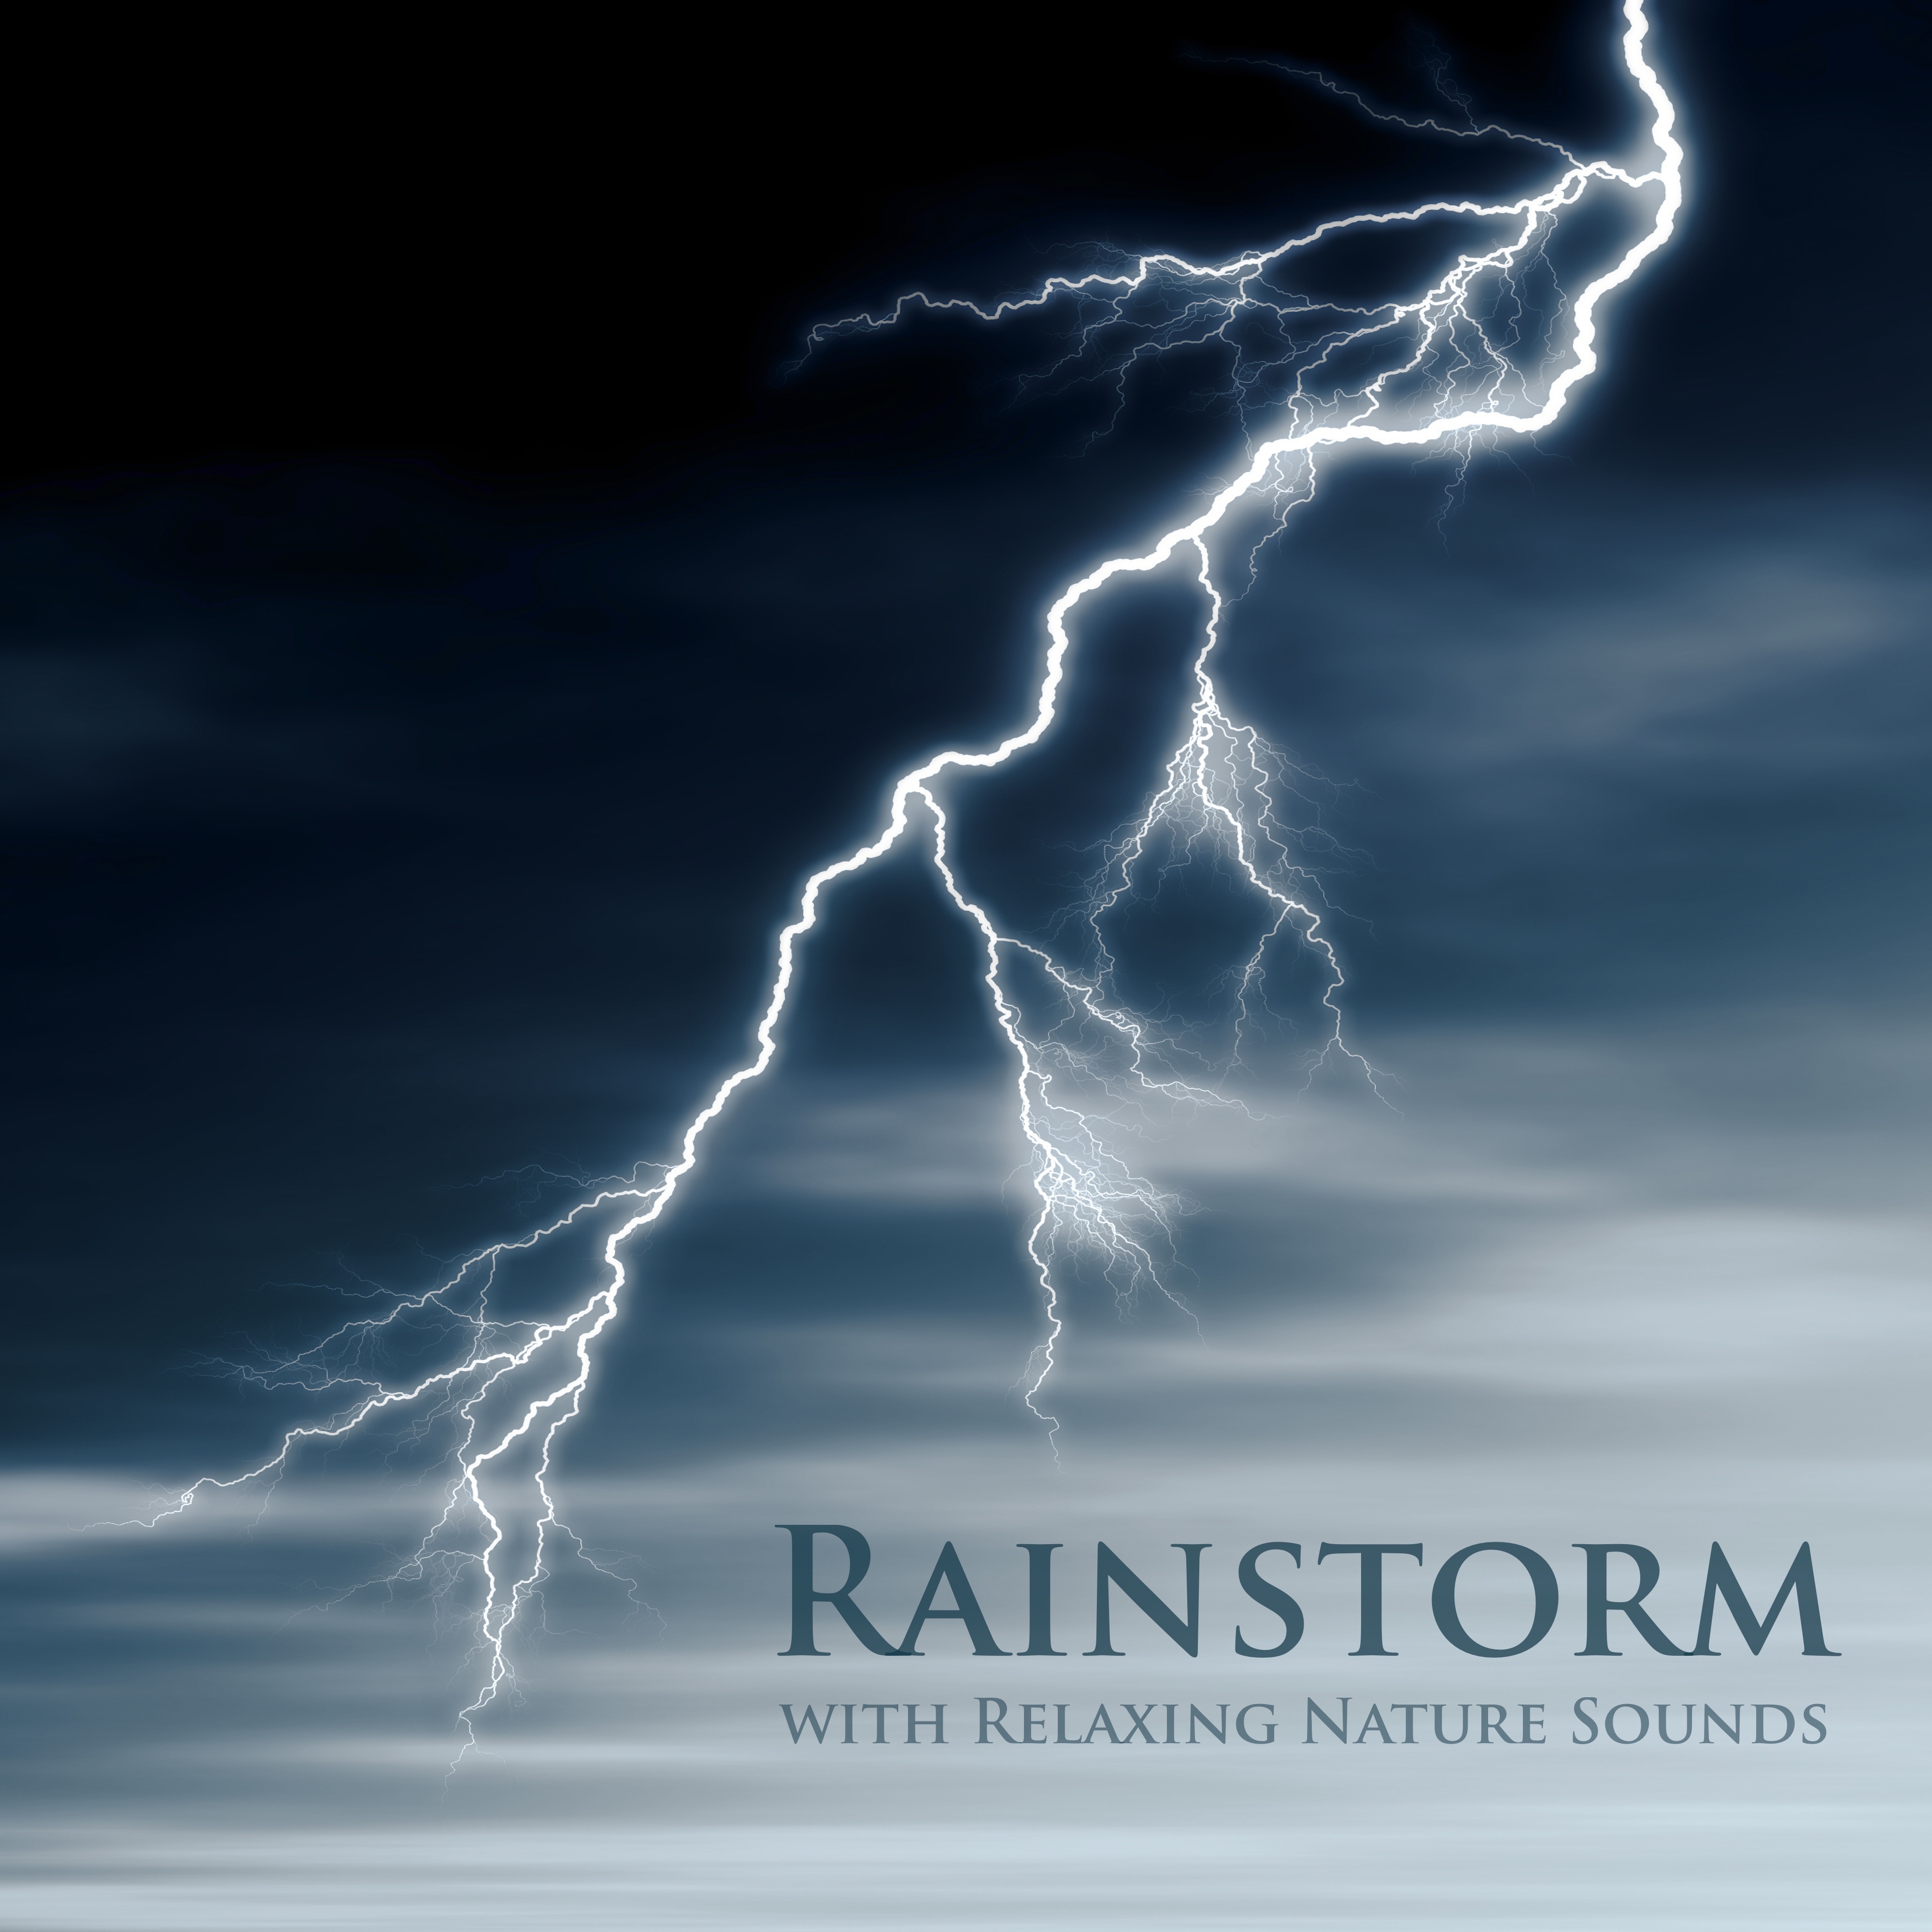 Rainstorm with Relaxing Nature Sounds: Tropical Storm, Beach Wave Relaxing Music, Relaxing Bird Songs & Nature Meditation Music